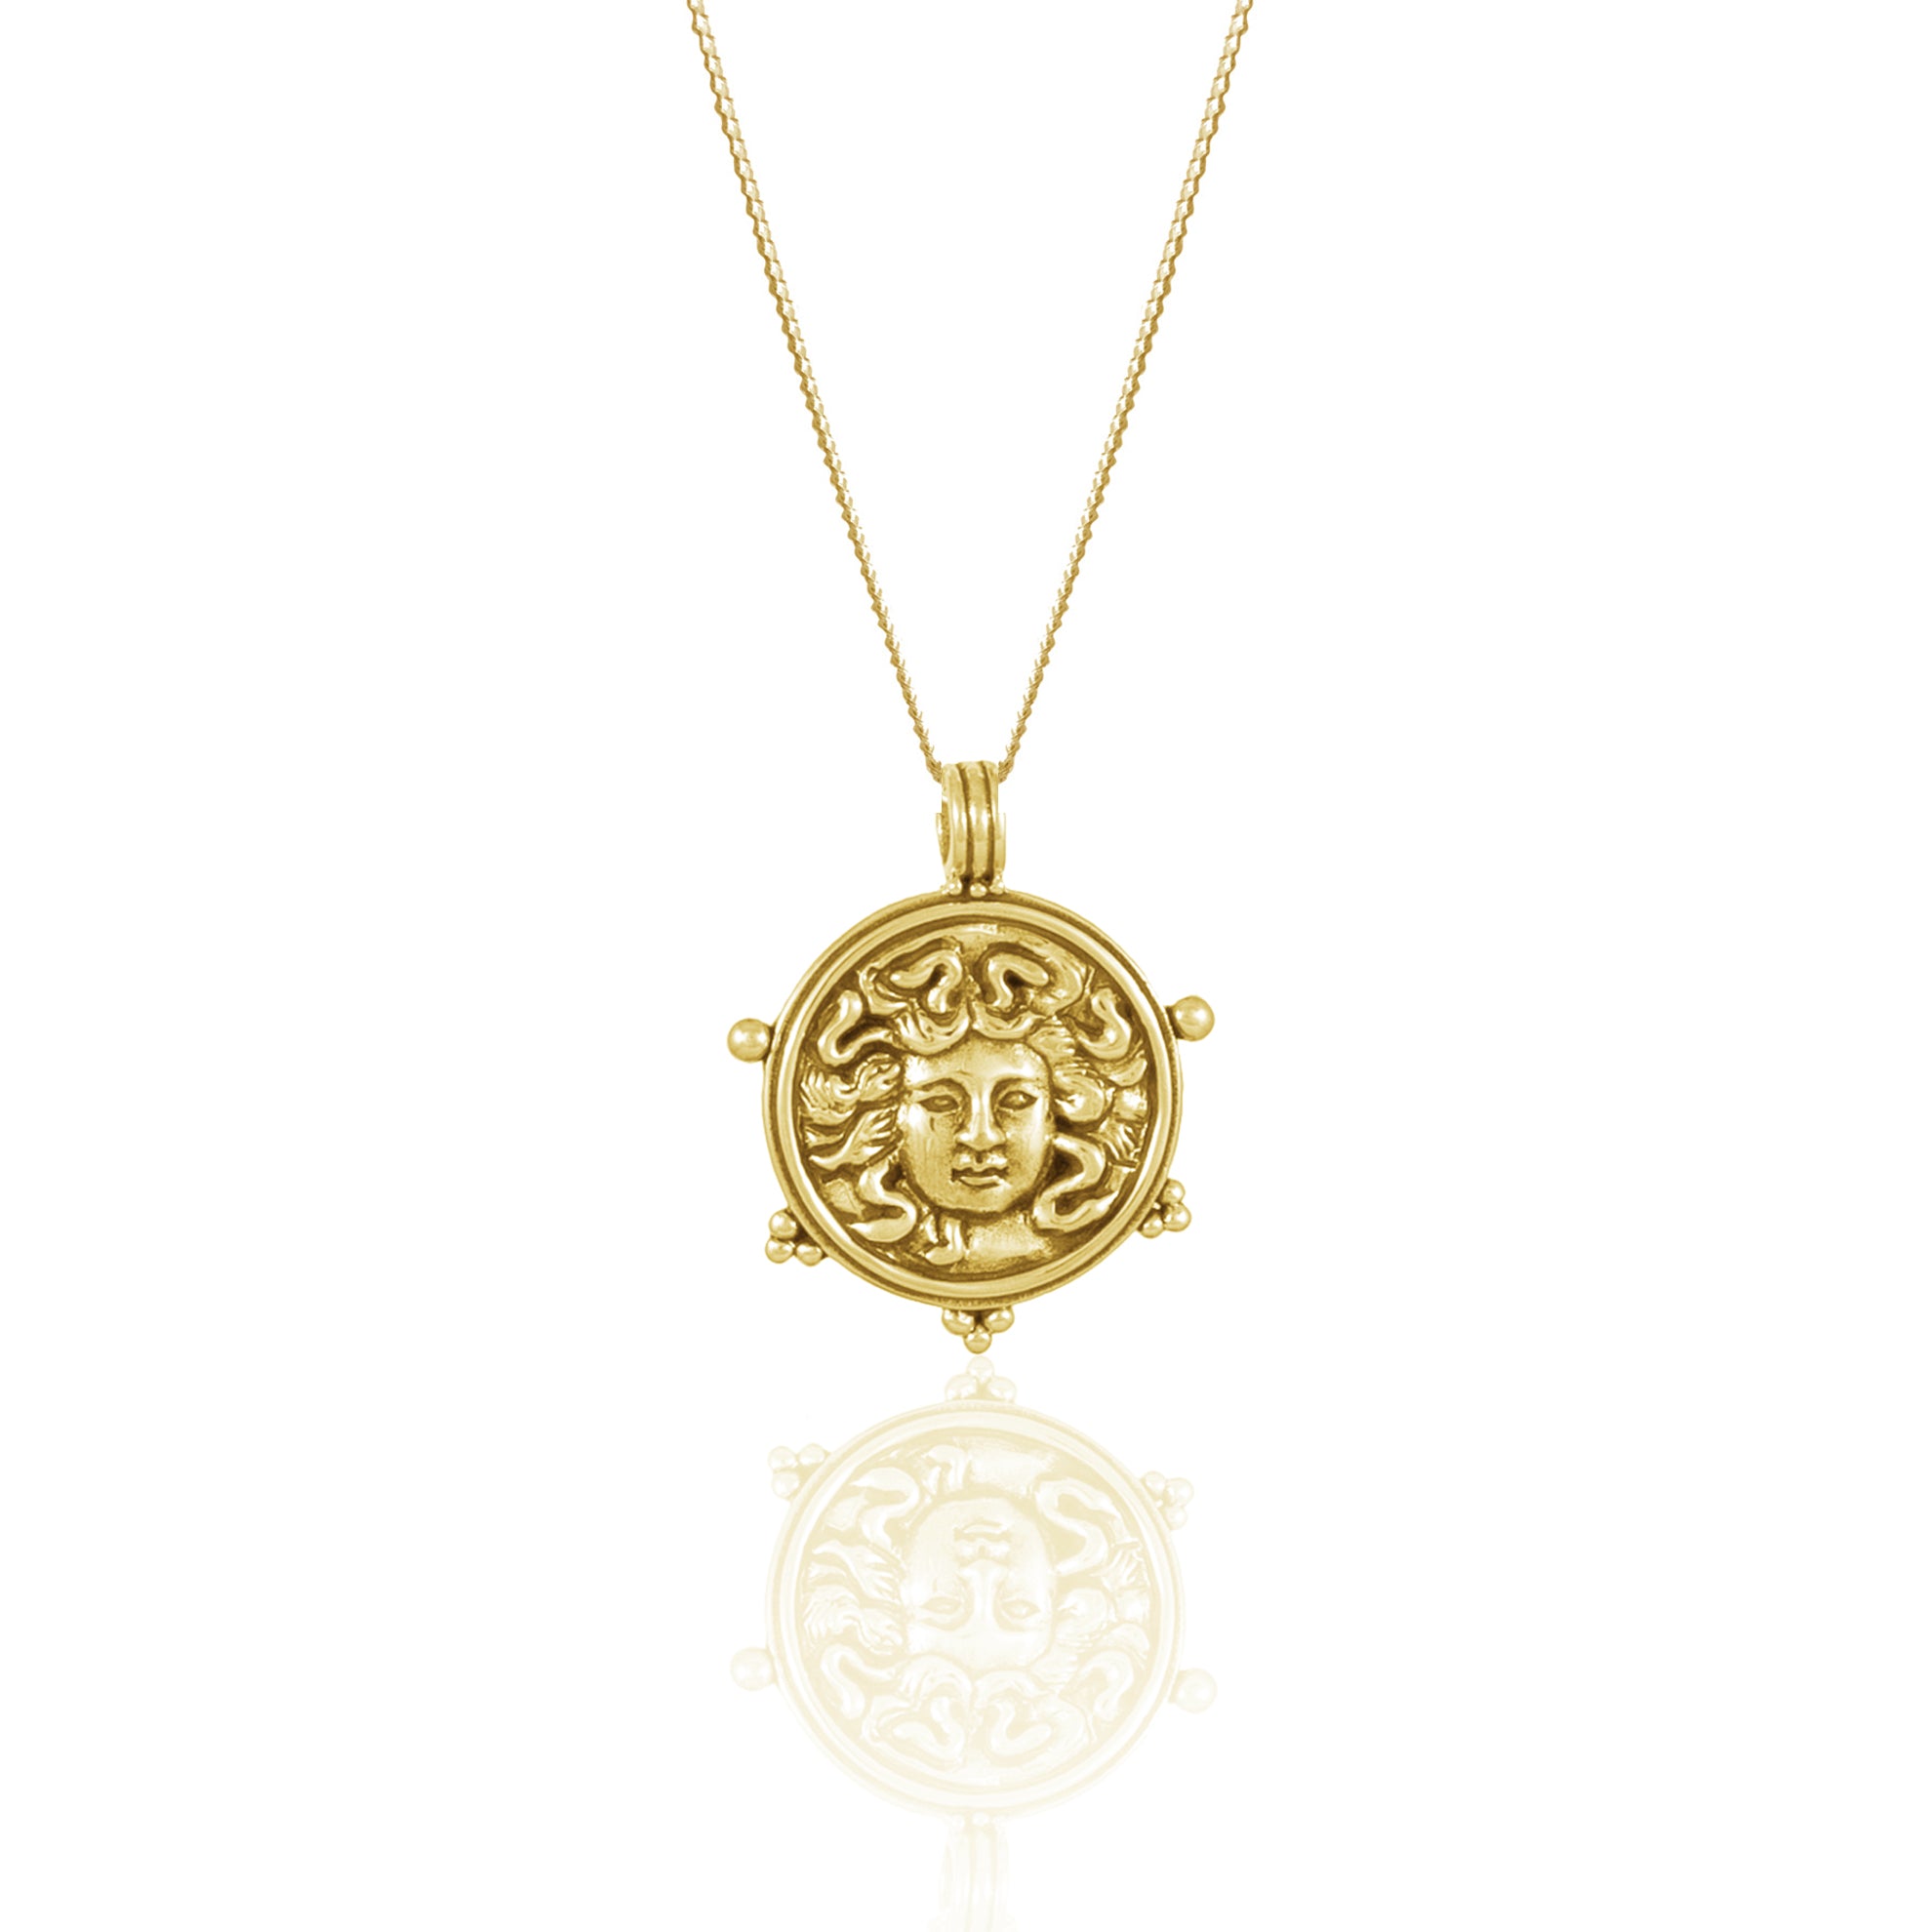 Medusa Pendant for Protection - Necklace Gold